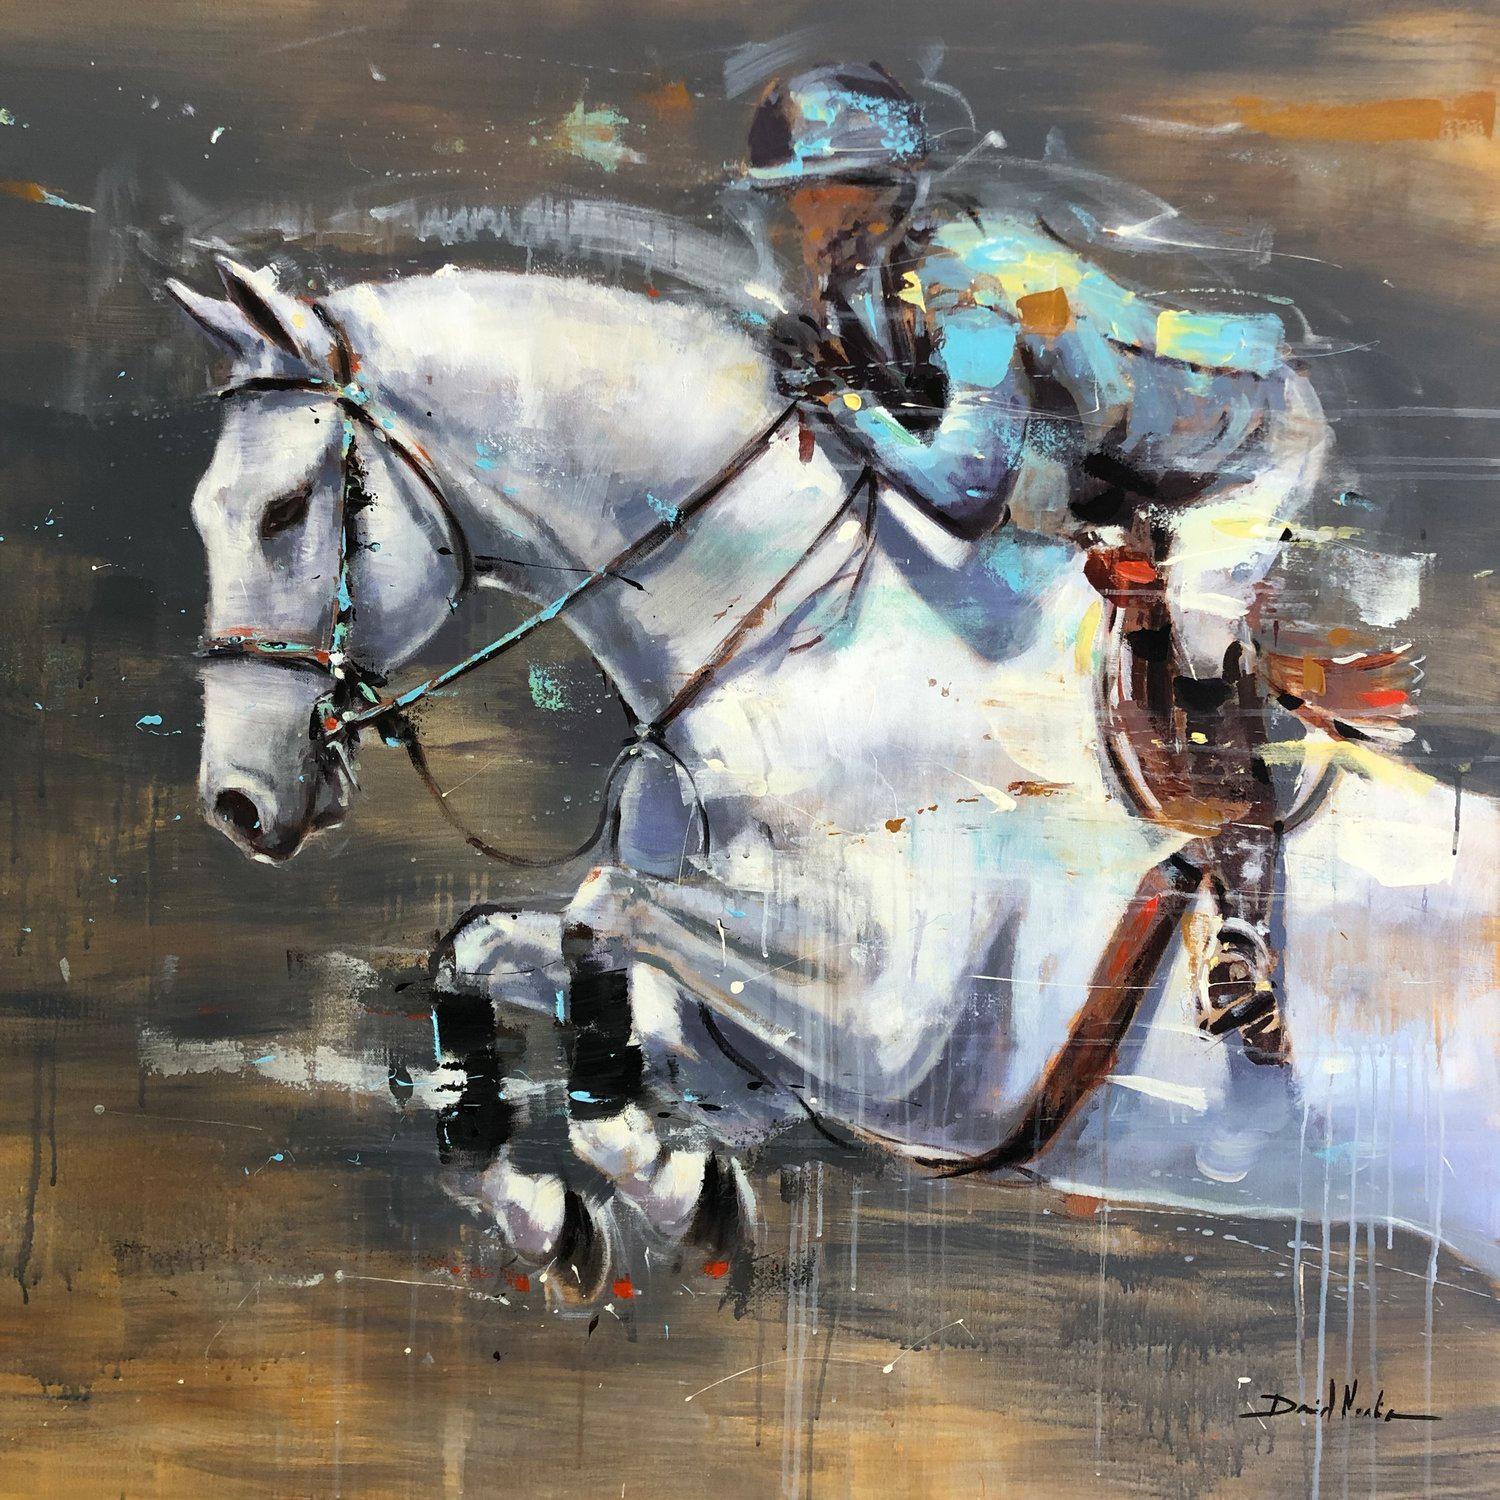 David Noalia, "Jumping in White", 40x40 Colorful Equine Dressage Oil Painting